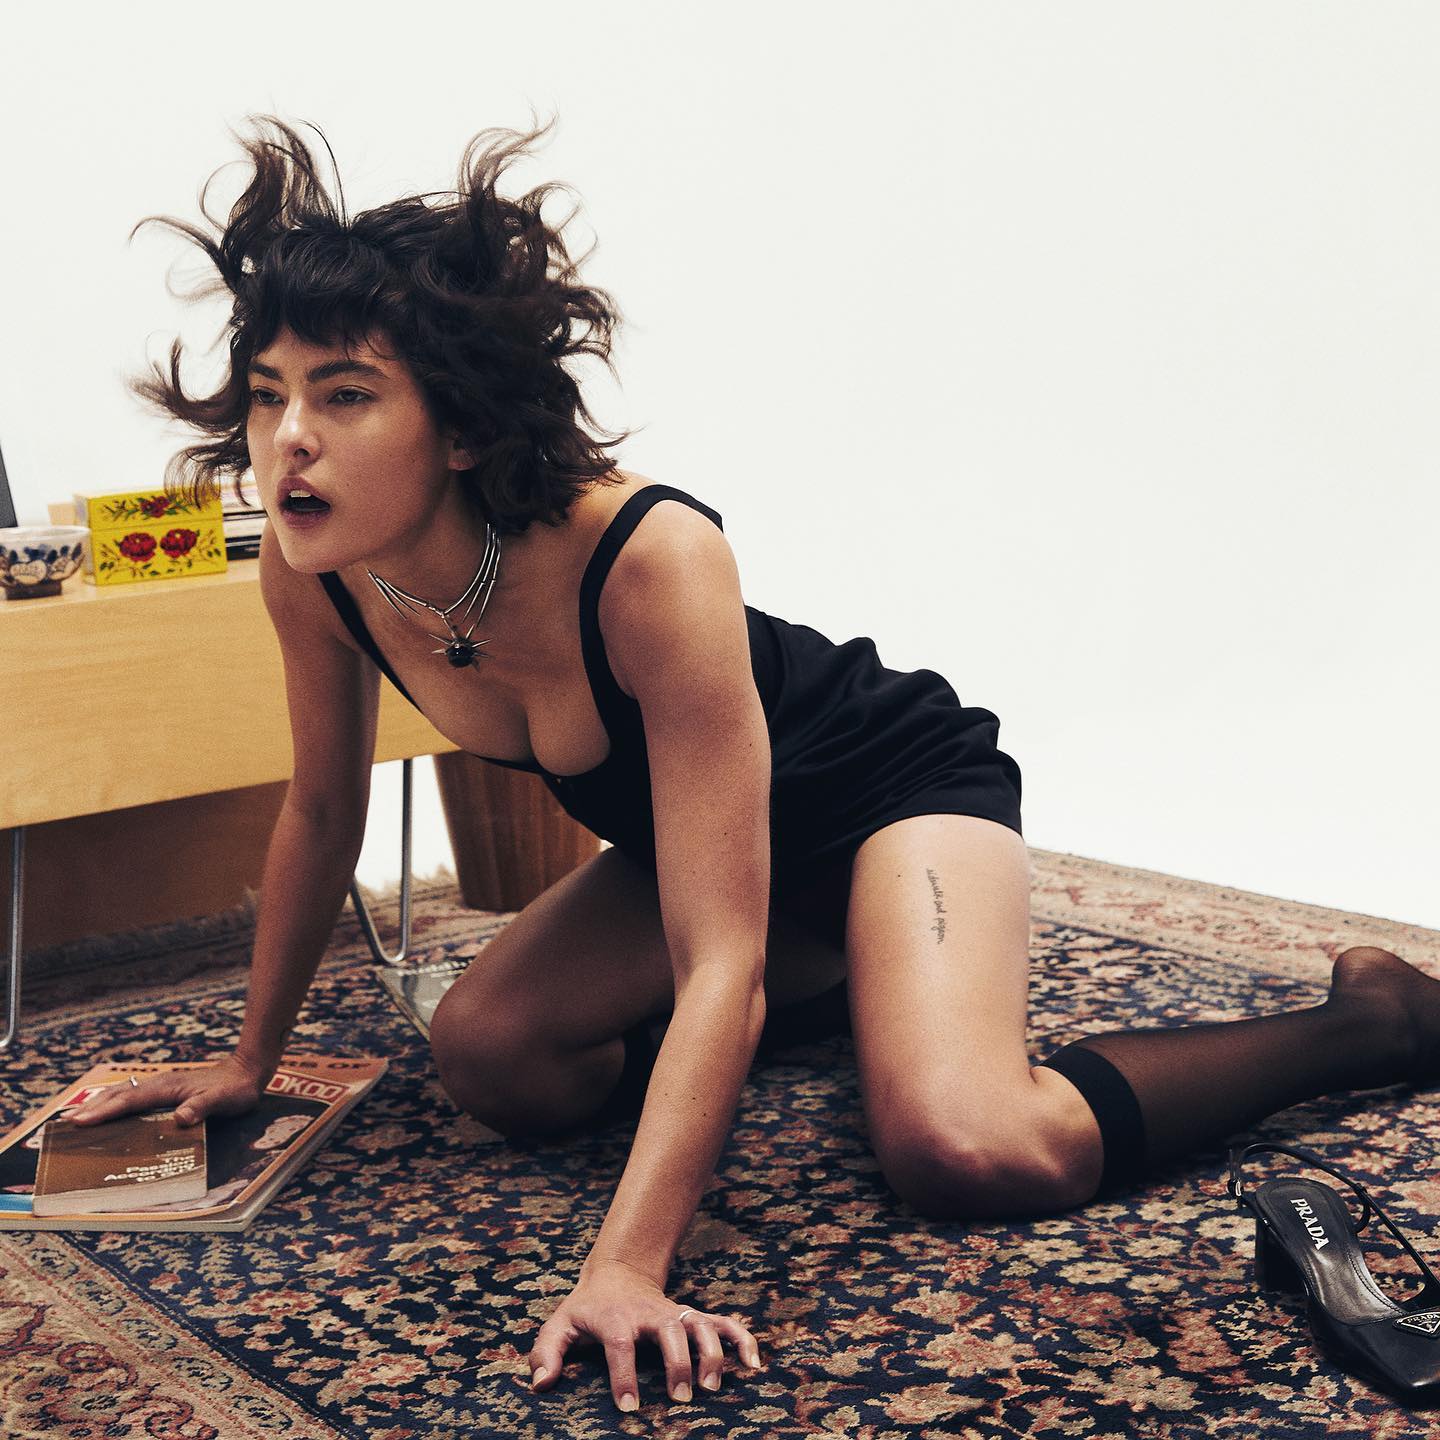 Miya Folick in a black dress crawling on a carpet, looking intensely at the camera with her hair blowing upwards.